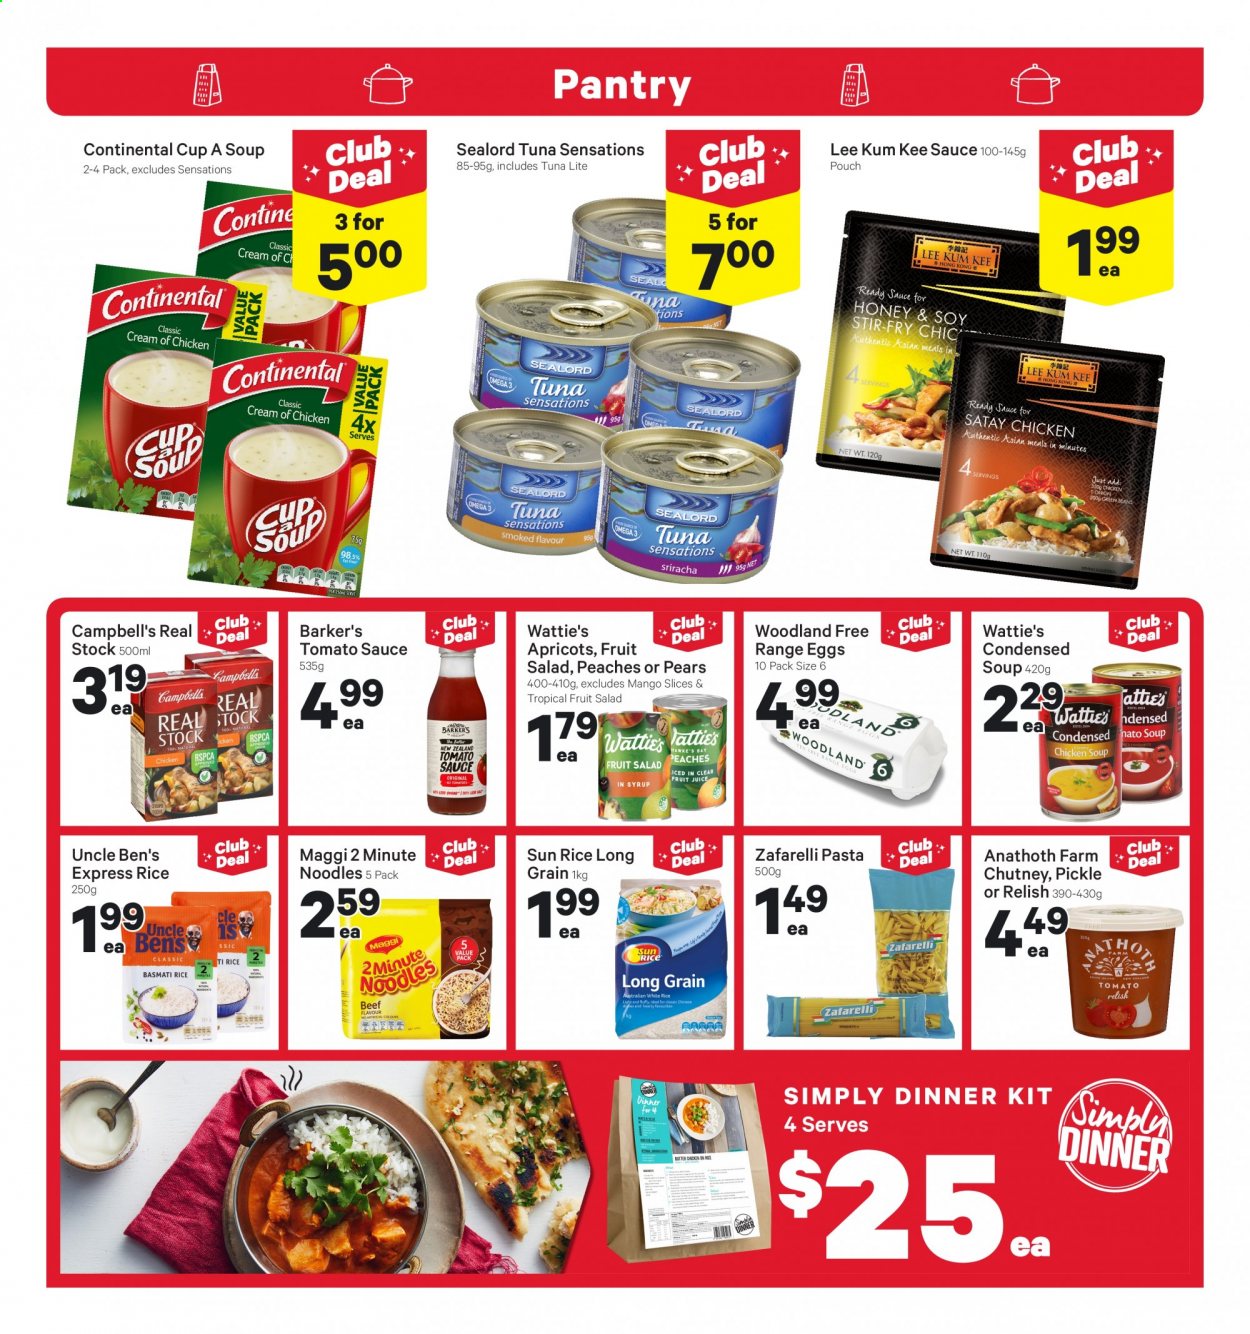 thumbnail - New World mailer - 17.05.2021 - 23.05.2021 - Sales products - mango, pears, apricots, peaches, tuna, Sealord, Campbell's, chicken soup, condensed soup, soup, pasta, dinner kit, noodles, Wattie's, instant soup, Continental, eggs, butter, Maggi, tomato sauce, Uncle Ben's, sealord tuna, fruit salad, basmati rice, rice, white rice, sriracha, Lee Kum Kee, chutney, honey, juice, fruit juice, Omega-3. Page 11.